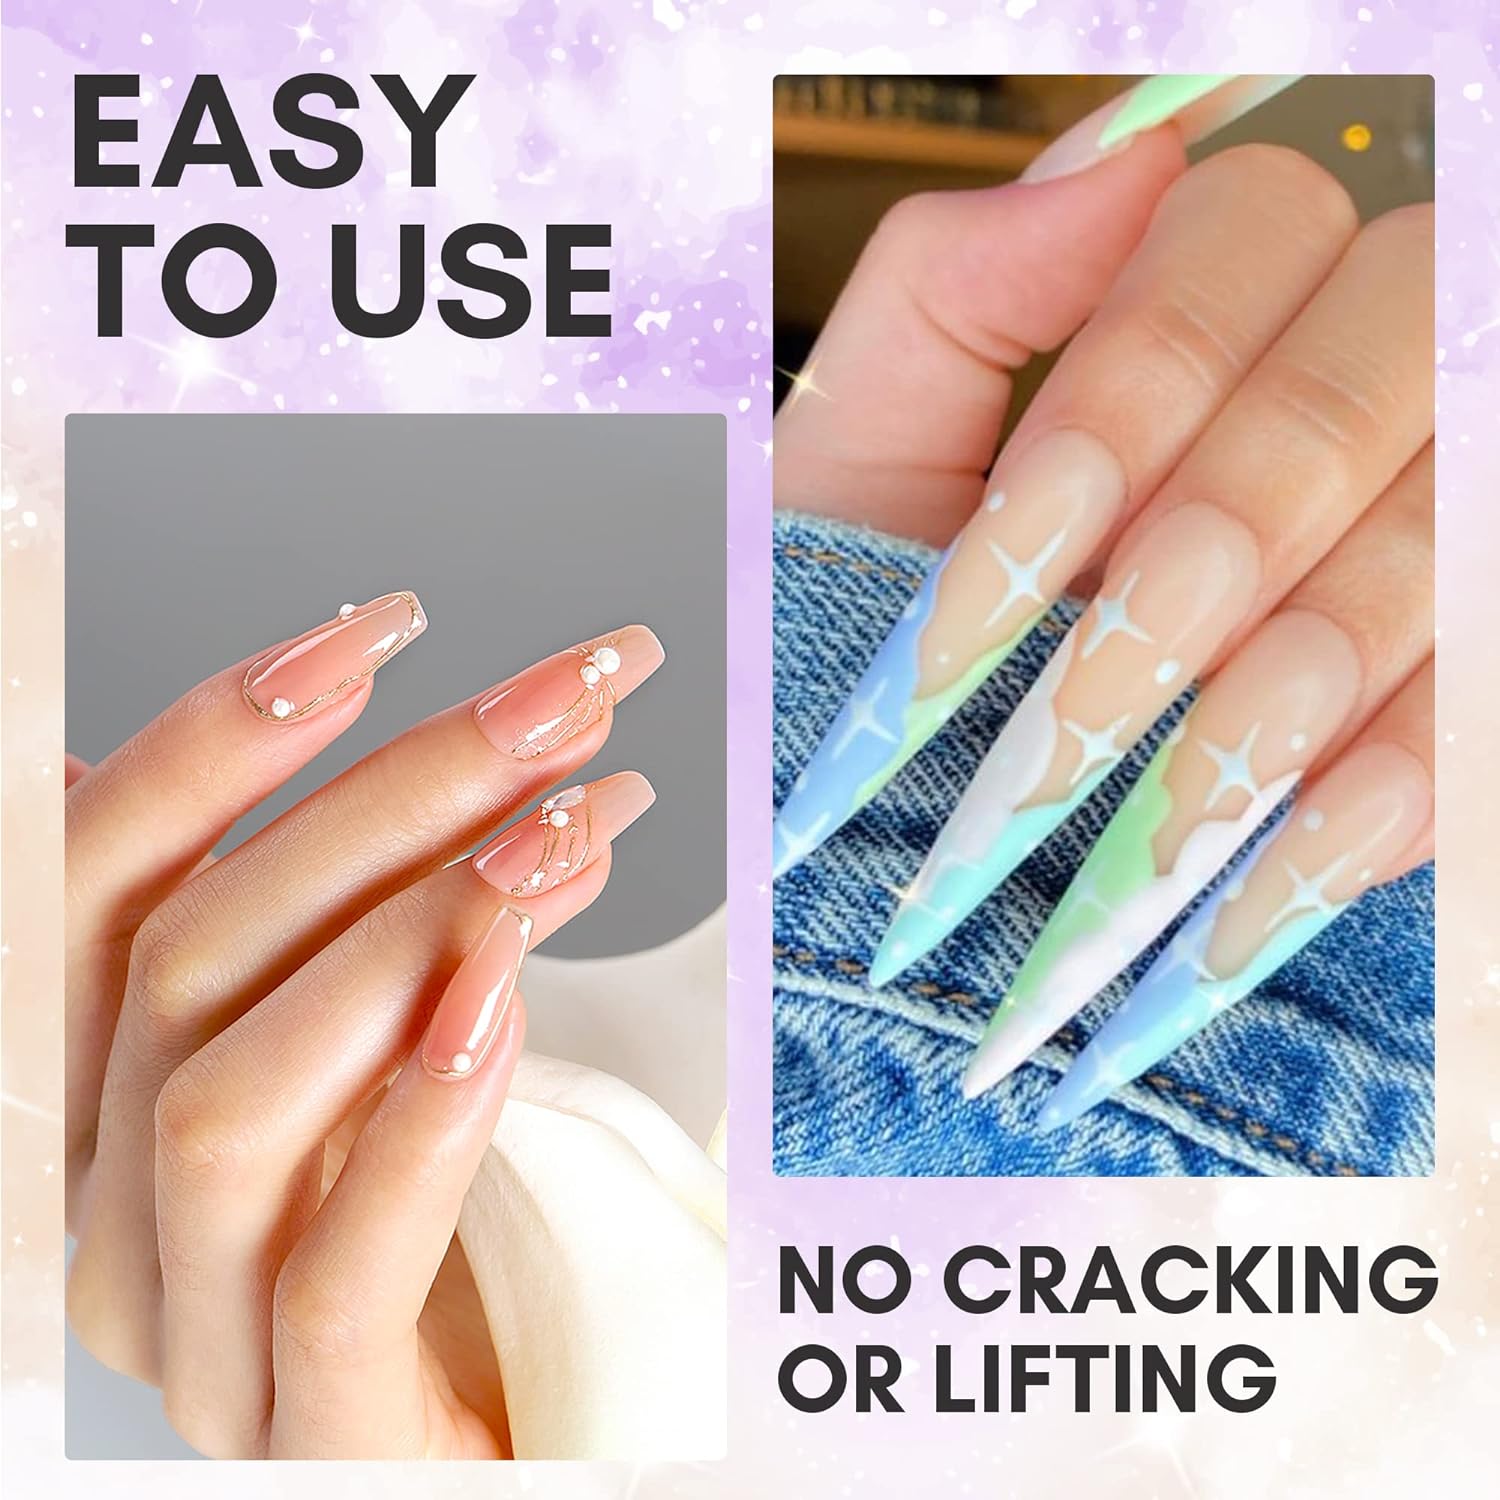 Professional 23 In 1 Acrylic Nail Kit For Beginners 12 Glitter Colors,  White, Clear, Pink, And AcAcrylic Powder For The Nail Art Extension And  Manicure From Chinabrands, $18.25 | DHgate.Com